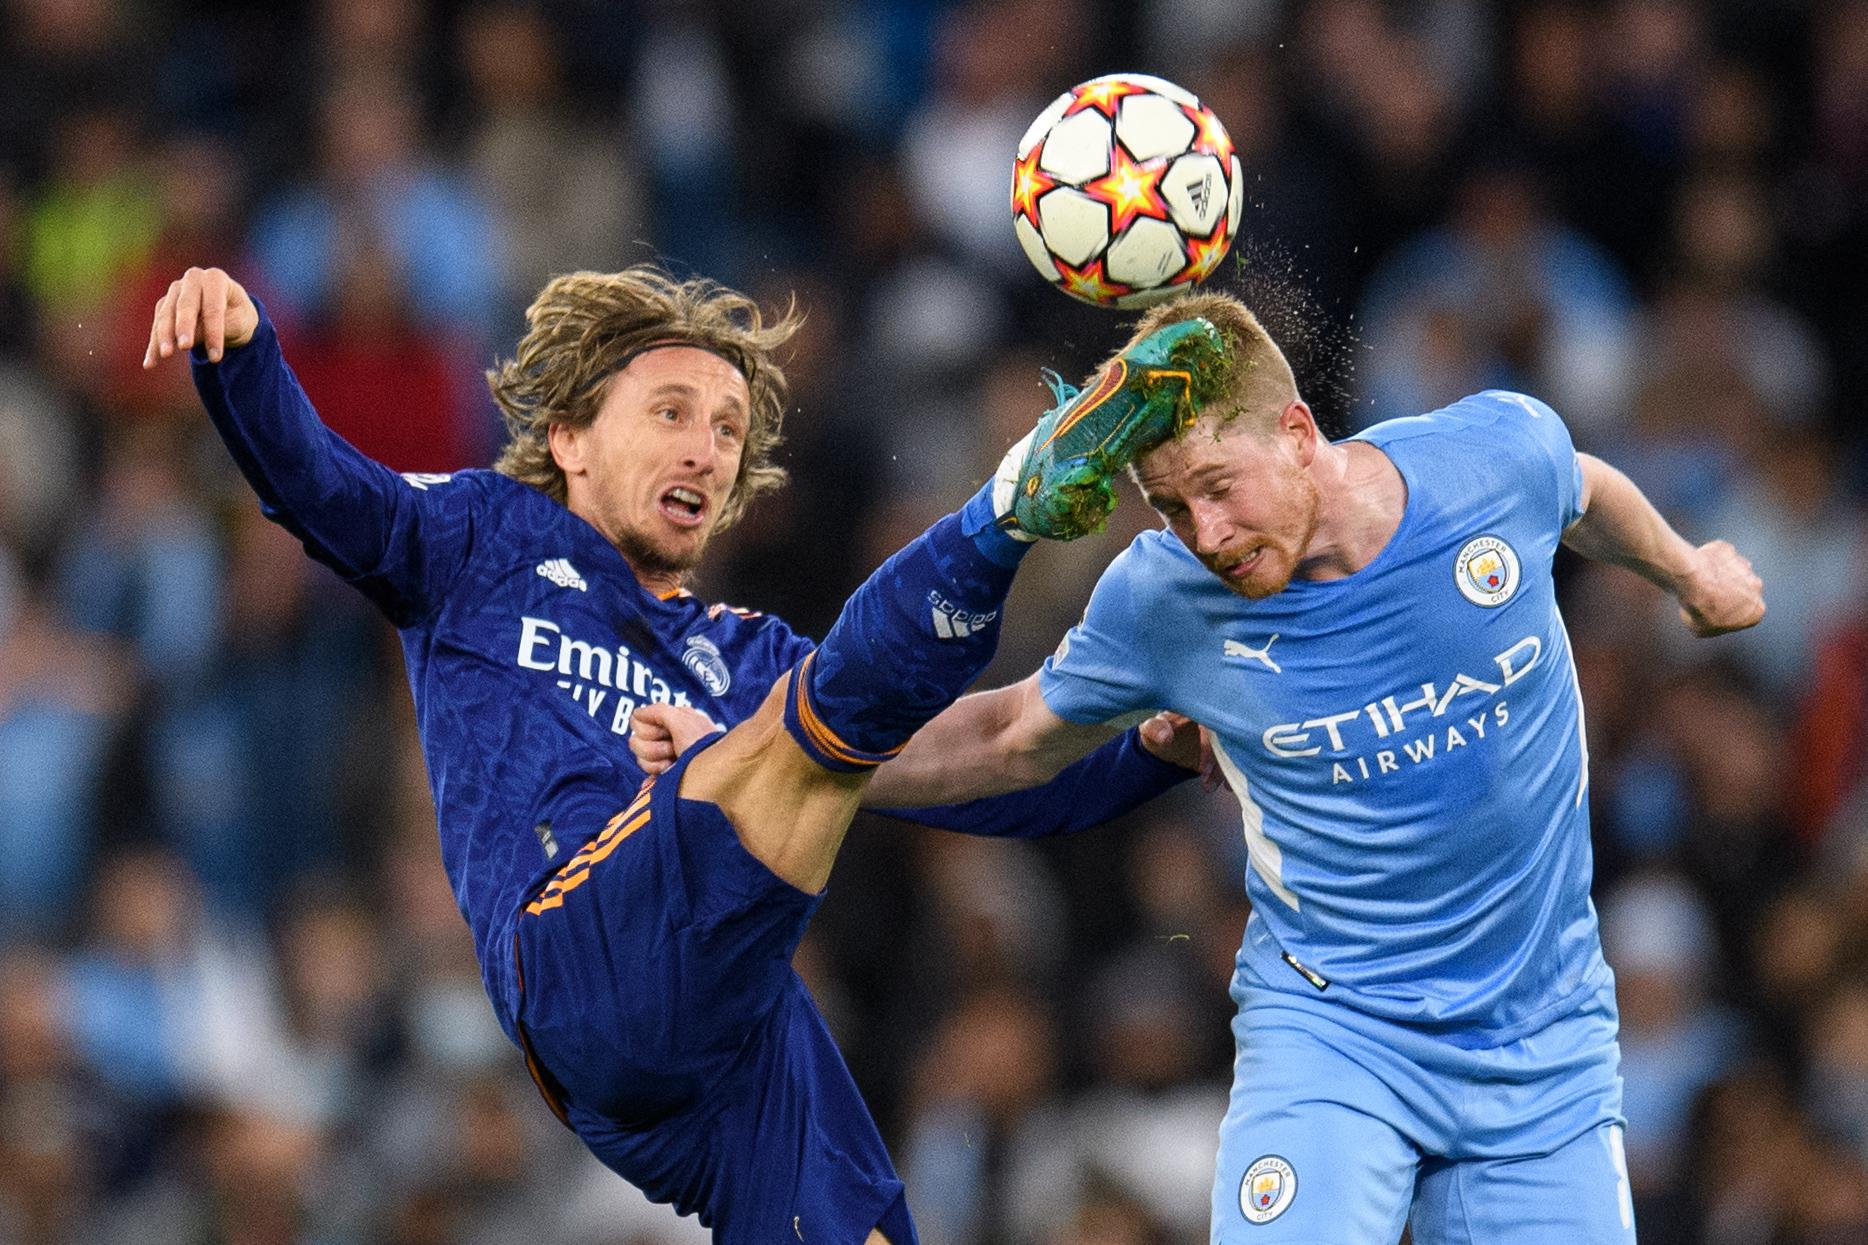 De Bruyne heads the ball with his eyes closed with a fist at Modric's chest as Modric looks up at and kicks toward the ball but hits De Bruyne in the head with his foot